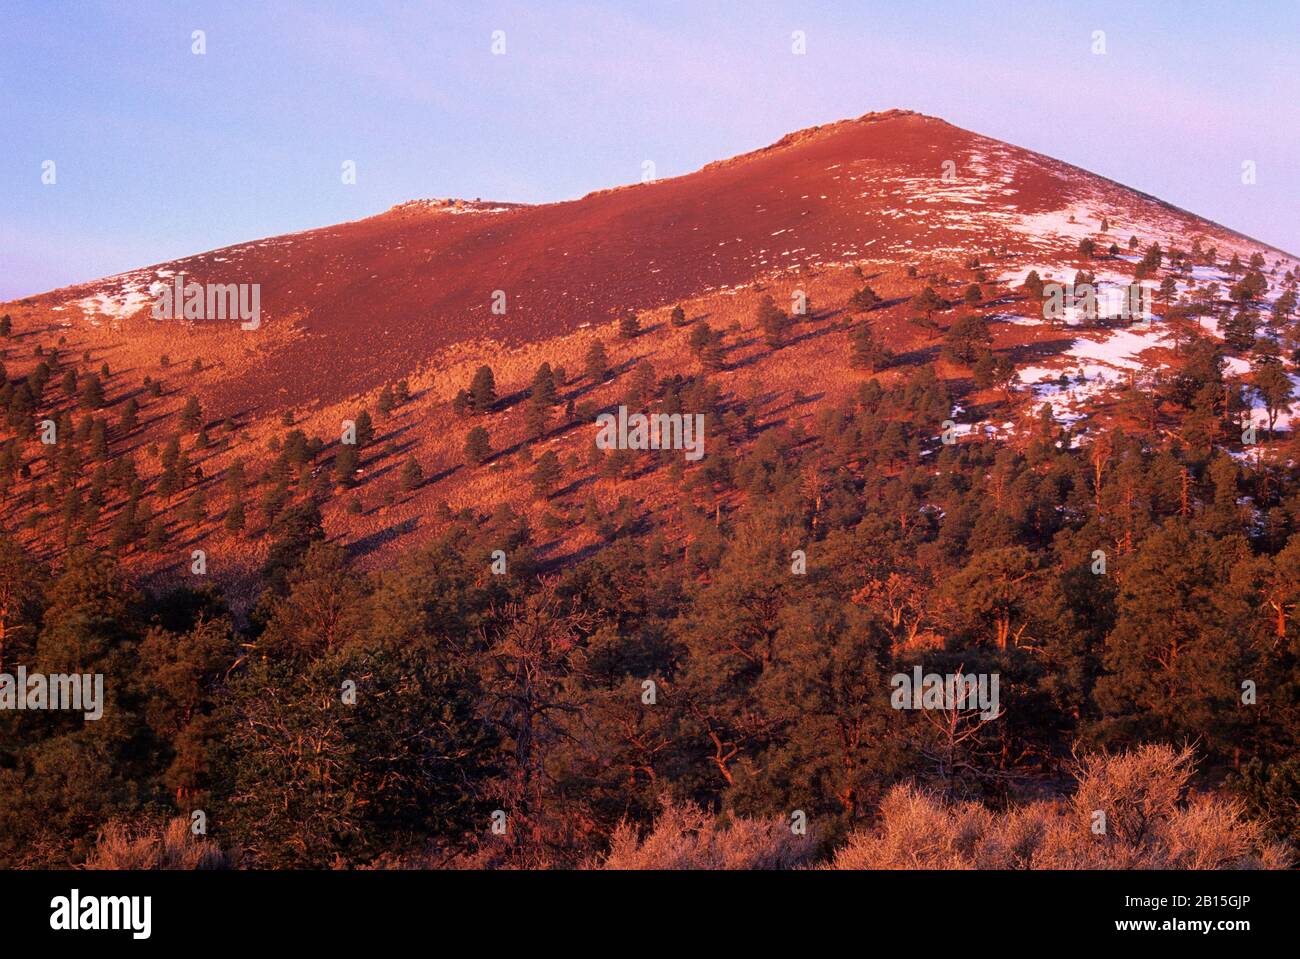 Sunset Crater from Cinder Hills Overlook, Sunset Crater National Monument, Arizona Stock Photo